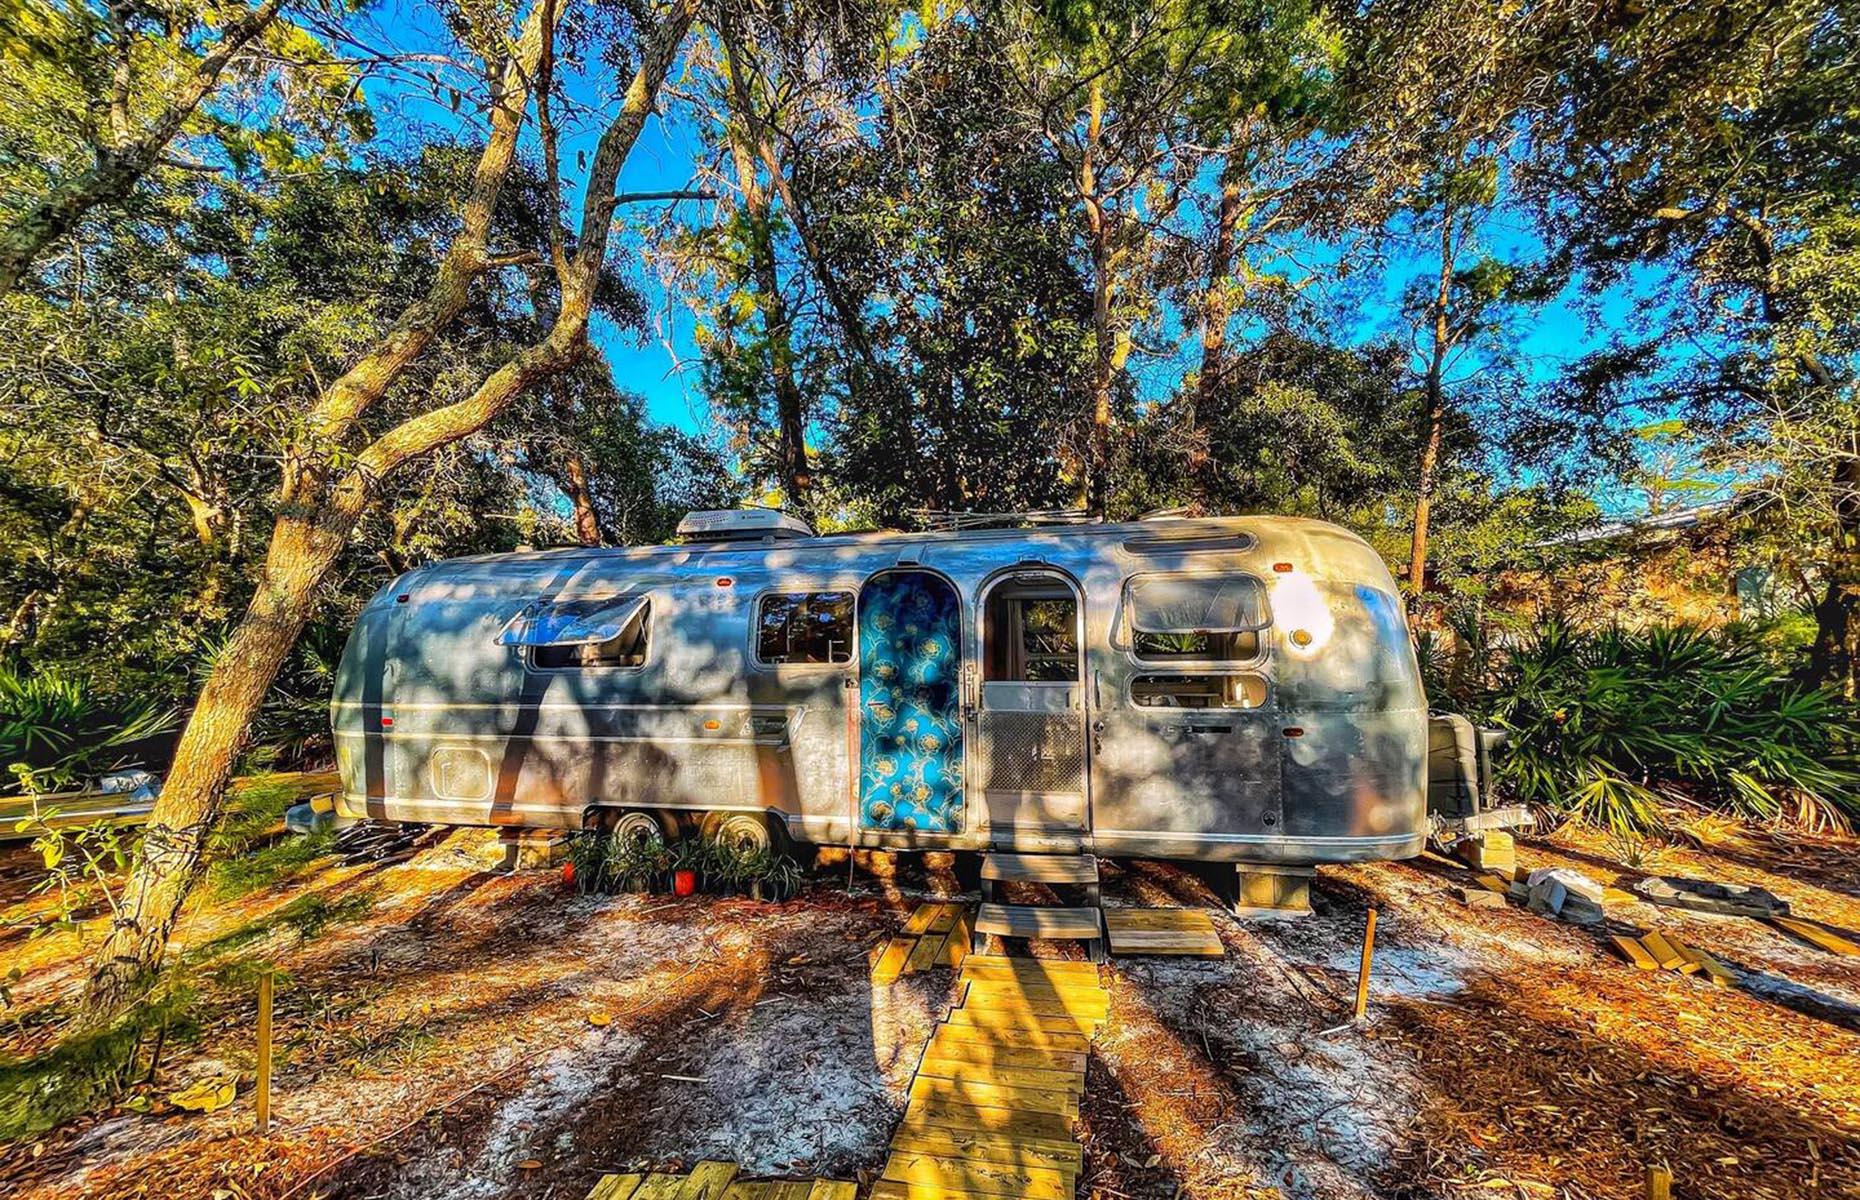 <p>Set on a large private Bayou estate overlooking Choctawhatchee Bay, this fully restored vintage 1969 Airstream International Sovereign Land Yacht is only moments away from miles of pristine beaches and State forests criss-crossed with walking and biking trails. The owner has nicknamed his Airstream <a href="https://www.airbnb.co.uk/rooms/755762911290334904?source_impression_id=p3_1718032753_P3qJxu4-Msol6GM2">Dreamy</a>, an equally accurate description of your vacation in this part of Santa Rosa should you choose to stay.</p>